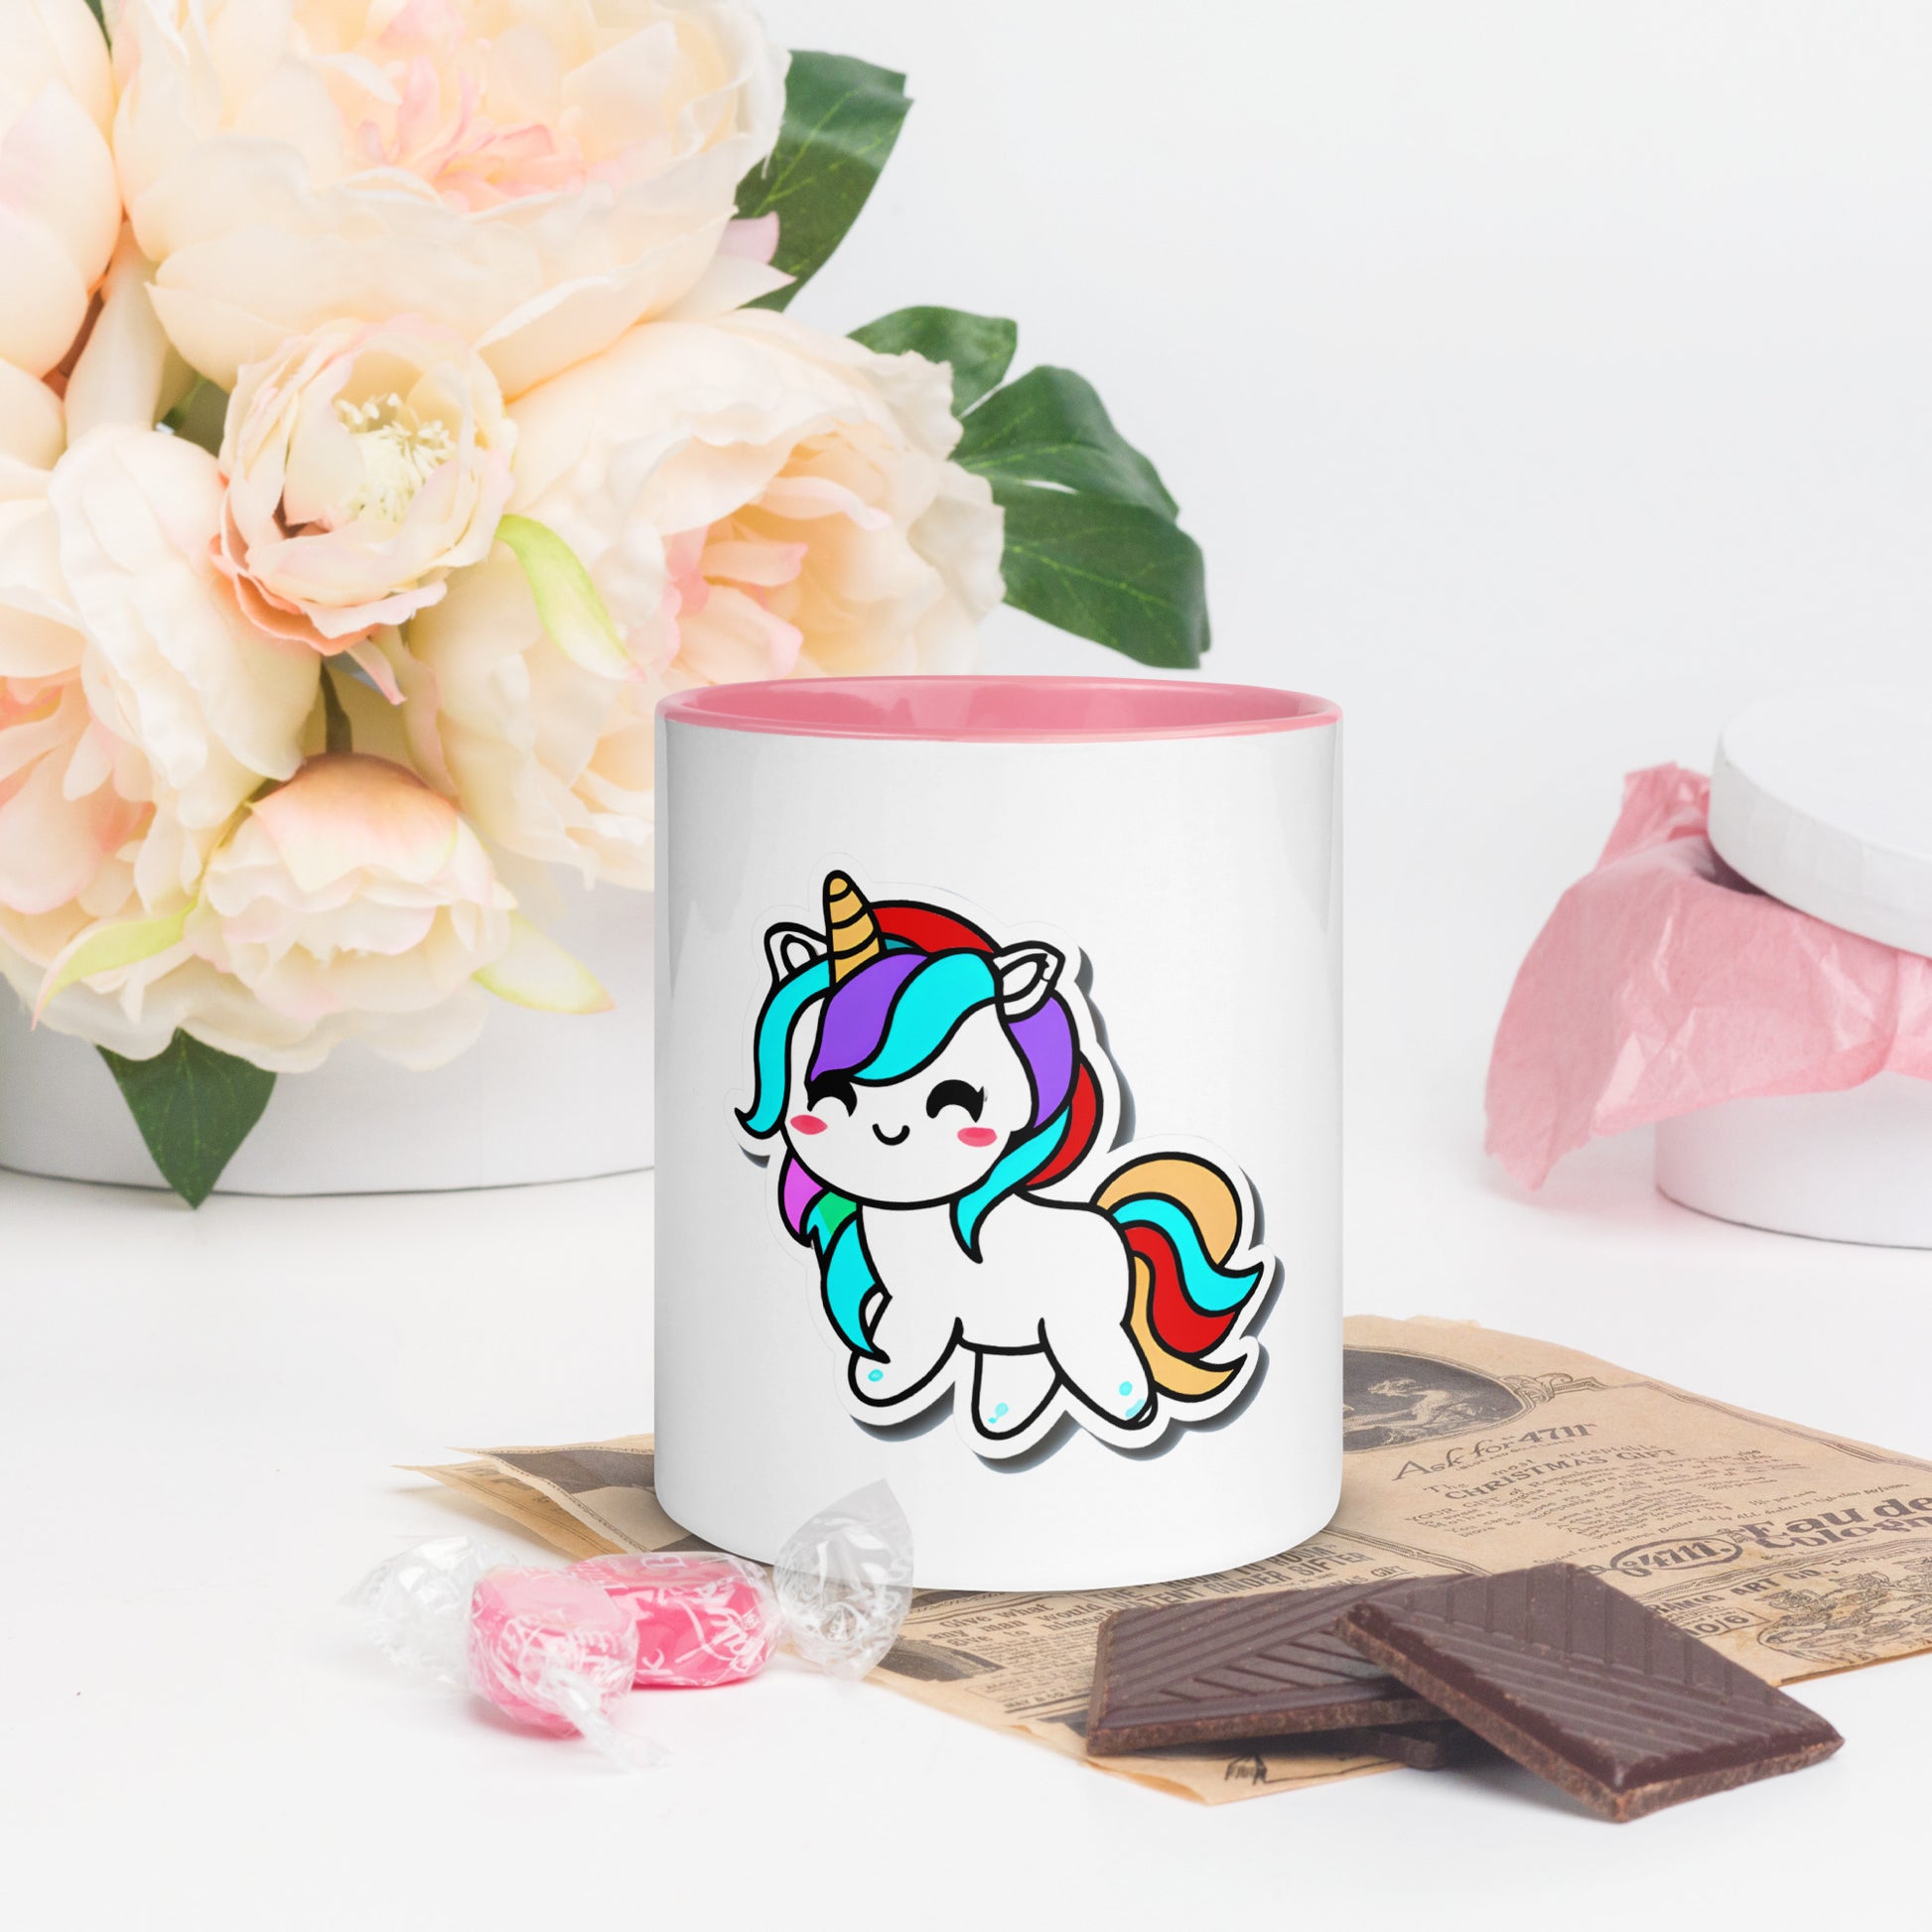 white coffee mug with unicorn cartoon and pink color inside surrounded by flowers and chocolate